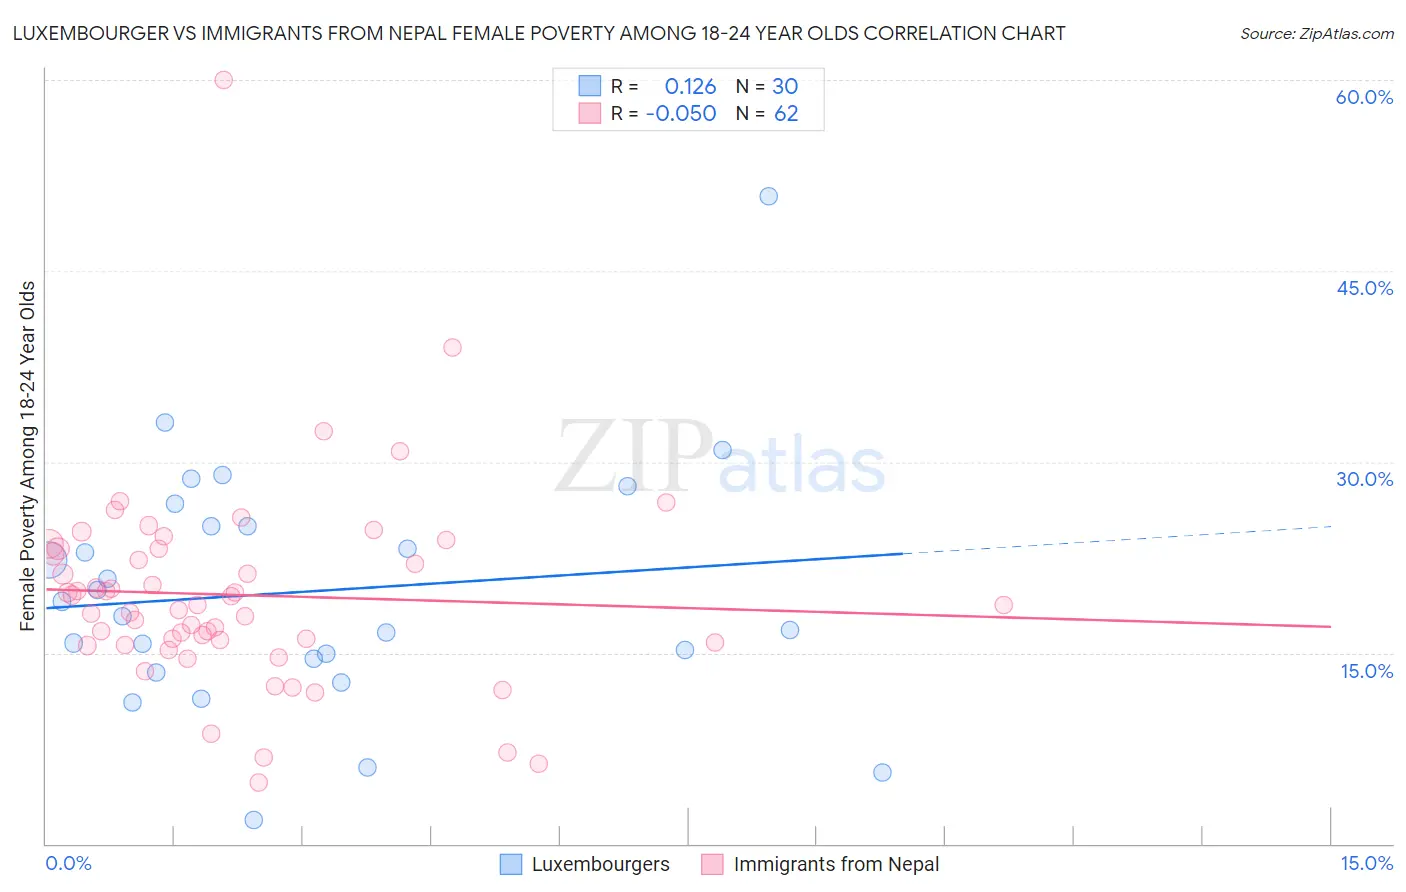 Luxembourger vs Immigrants from Nepal Female Poverty Among 18-24 Year Olds